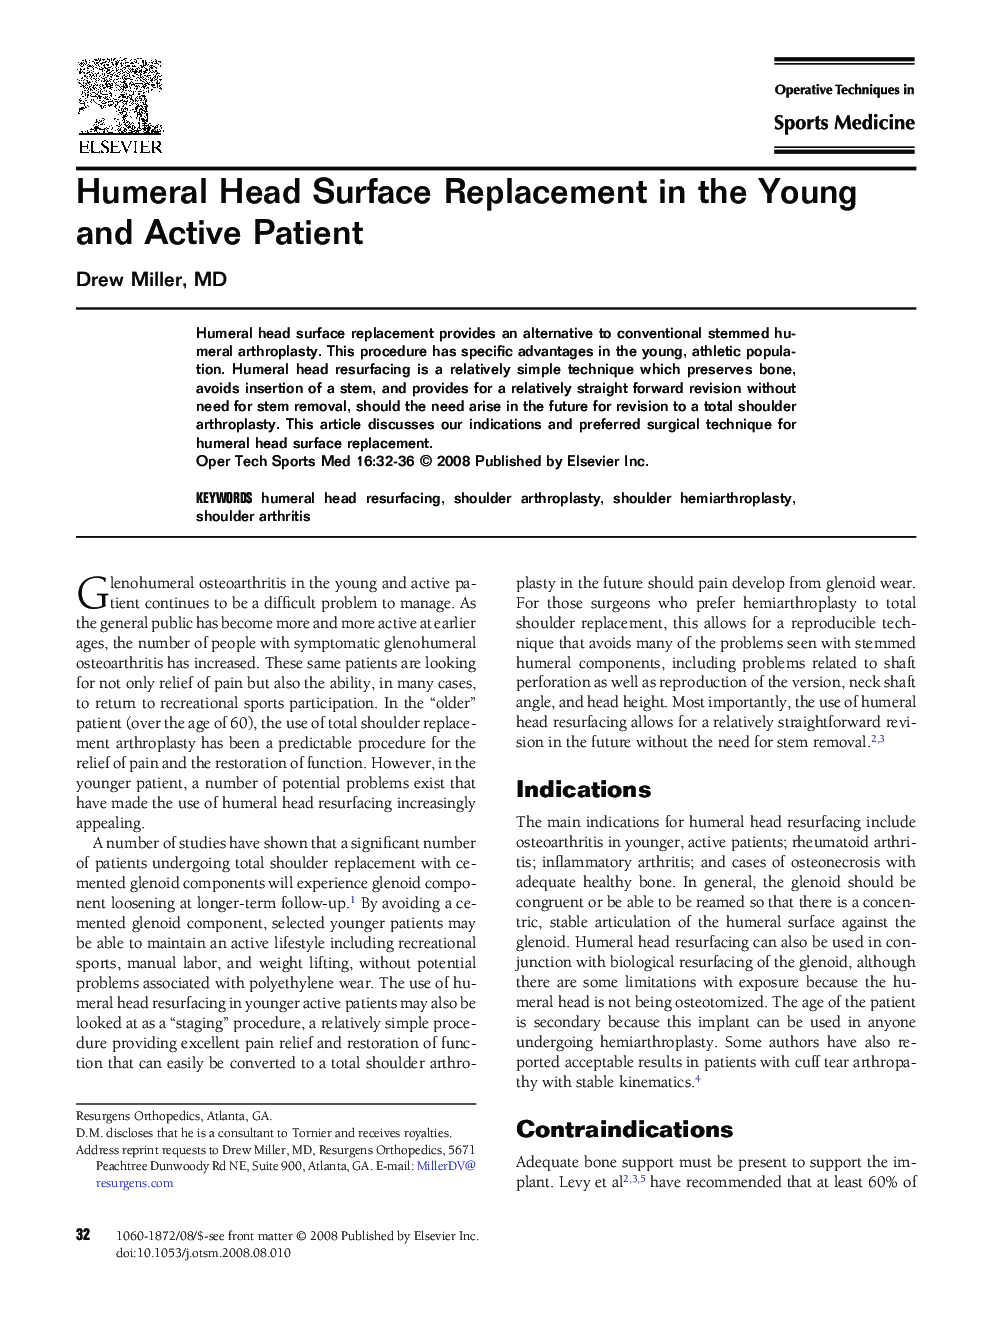 Humeral Head Surface Replacement in the Young and Active Patient